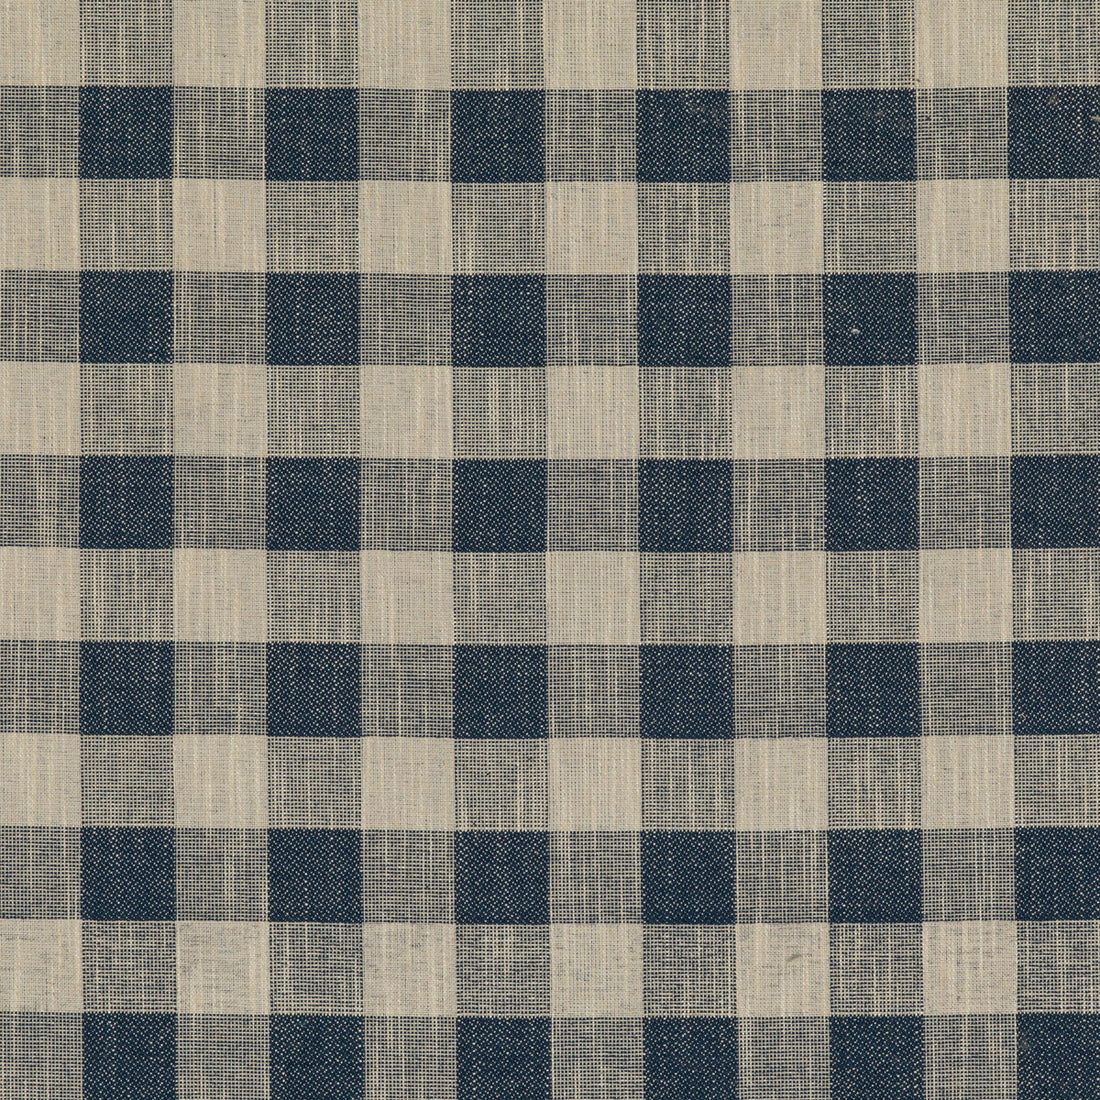 Block Check fabric in indigo color - pattern PF50490.680.0 - by Baker Lifestyle in the Block Weaves collection